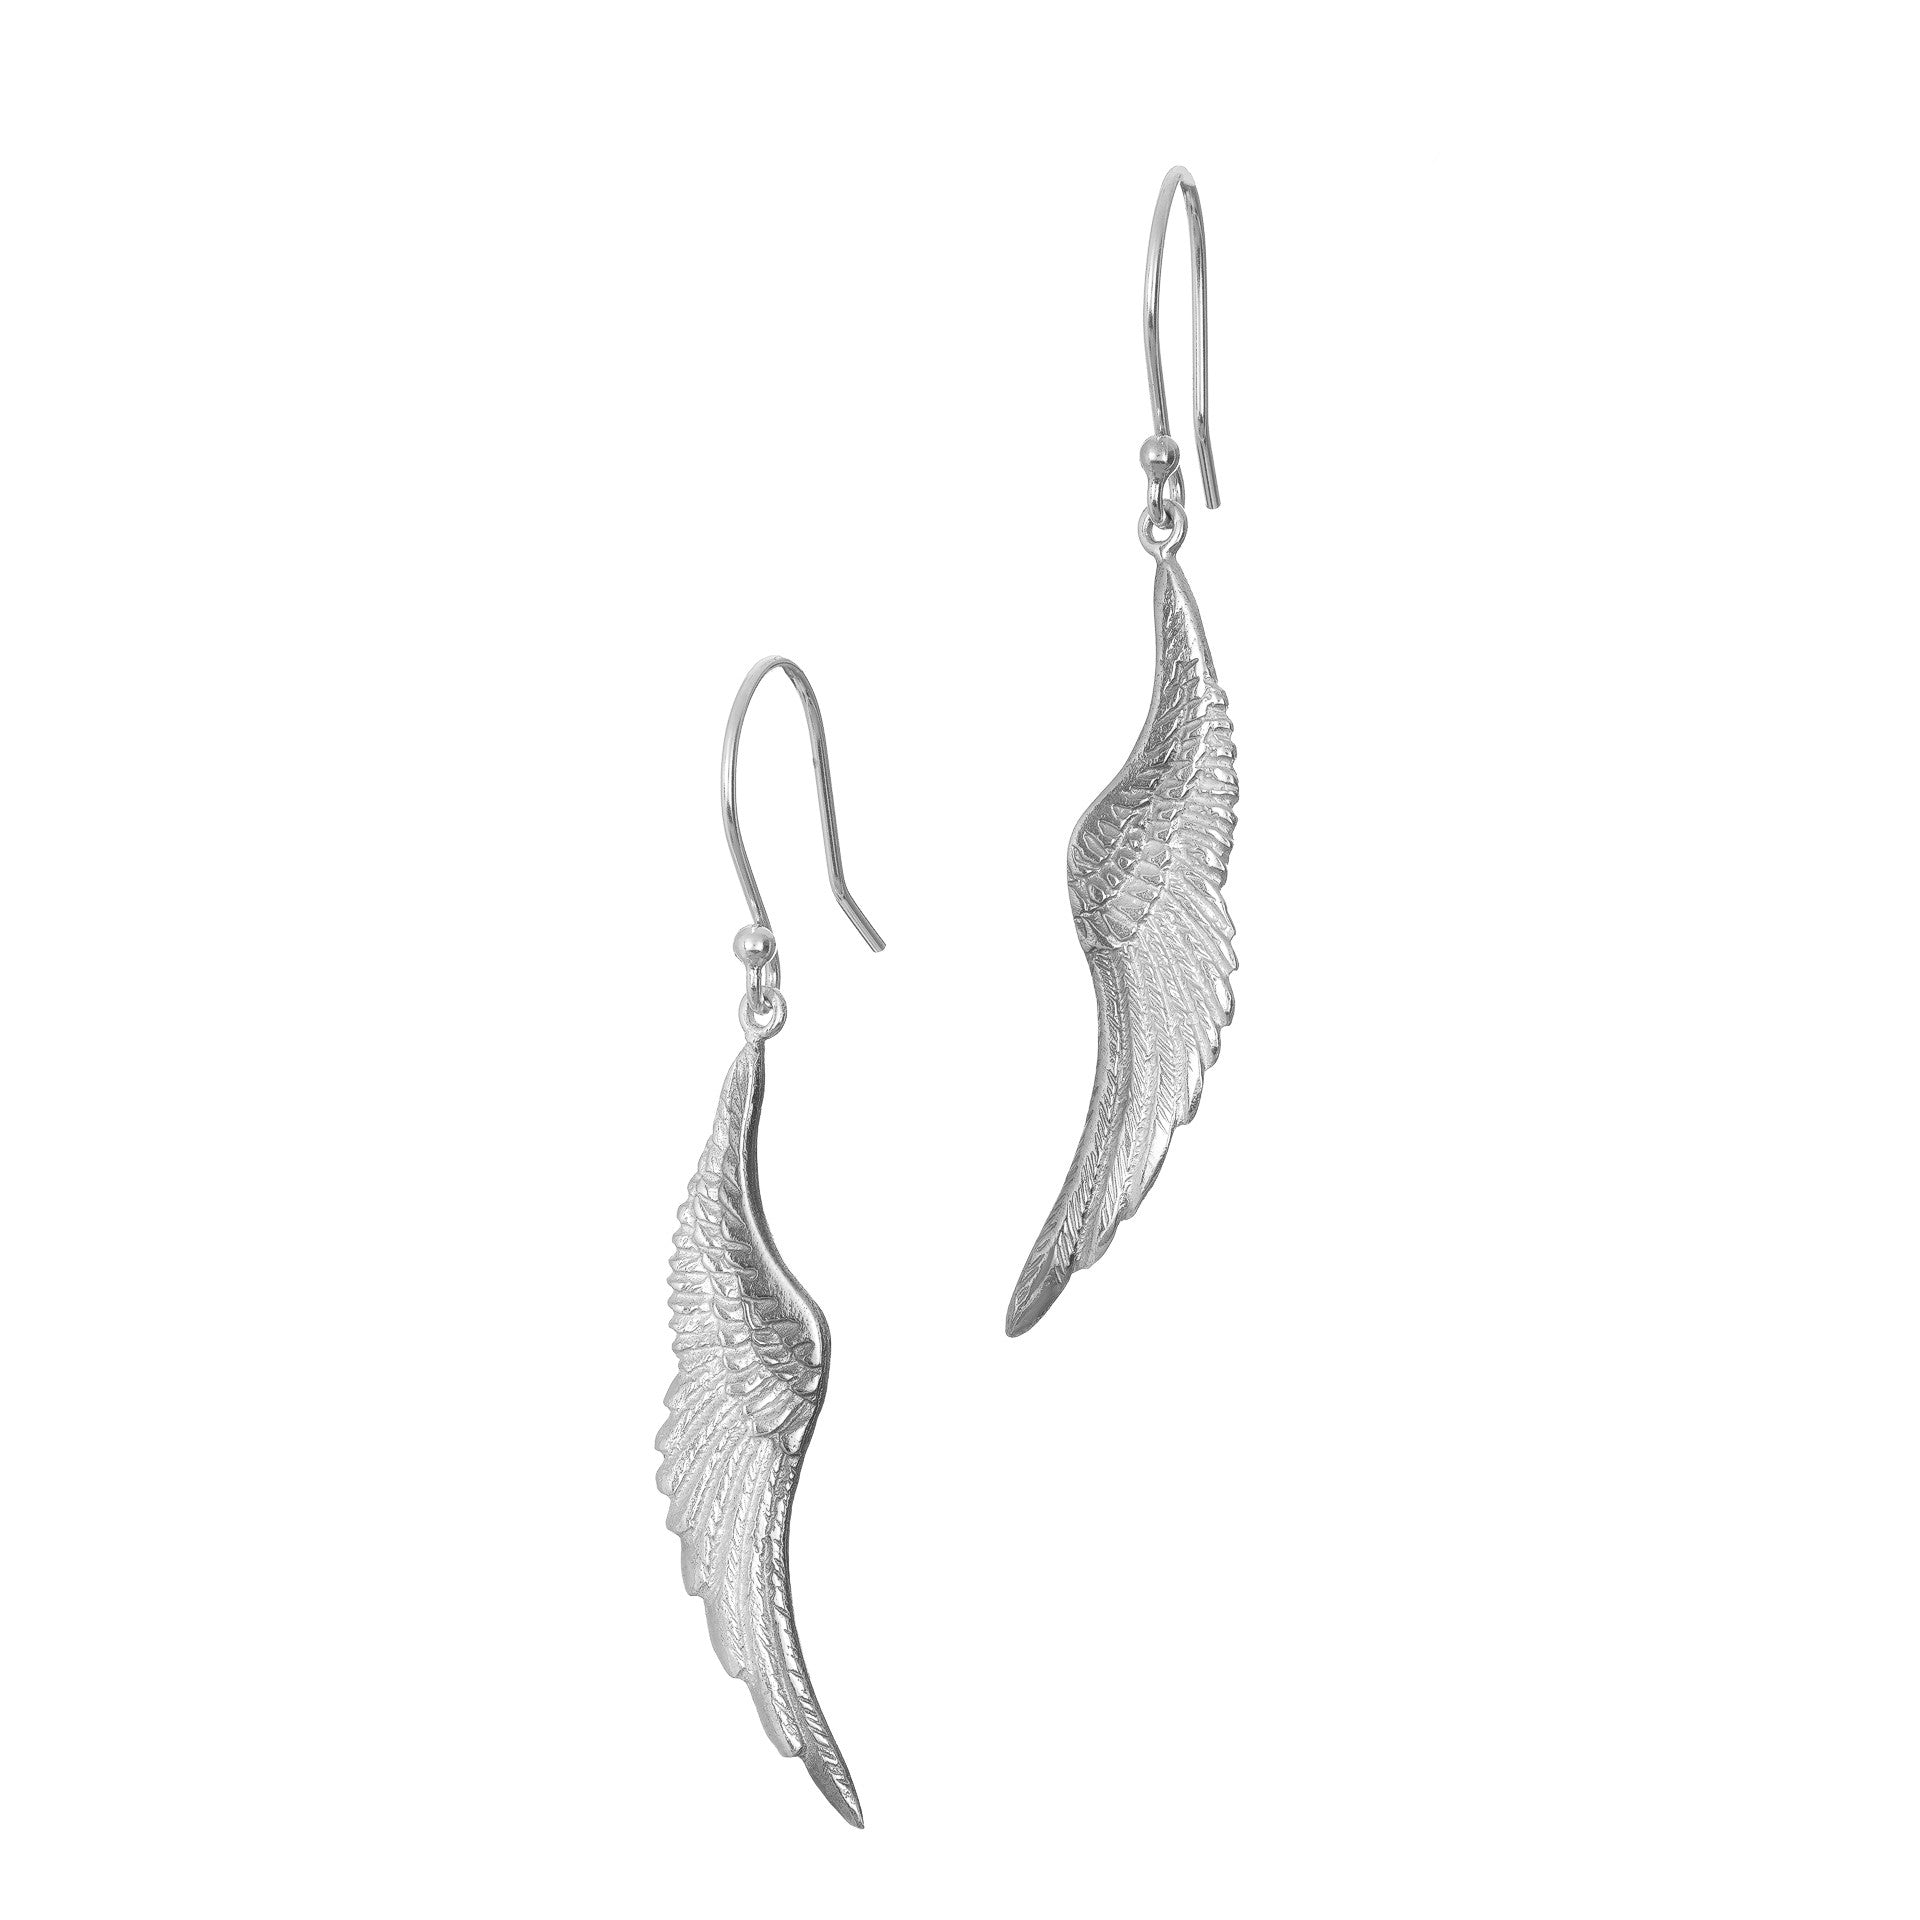 Angels Whisper Drop Earrings made in Ireland by Elena Brennan Jewellery with Sterling Silver. Angel wing earrings inspired by Celtic design, part of the Angel Jewellery collection.